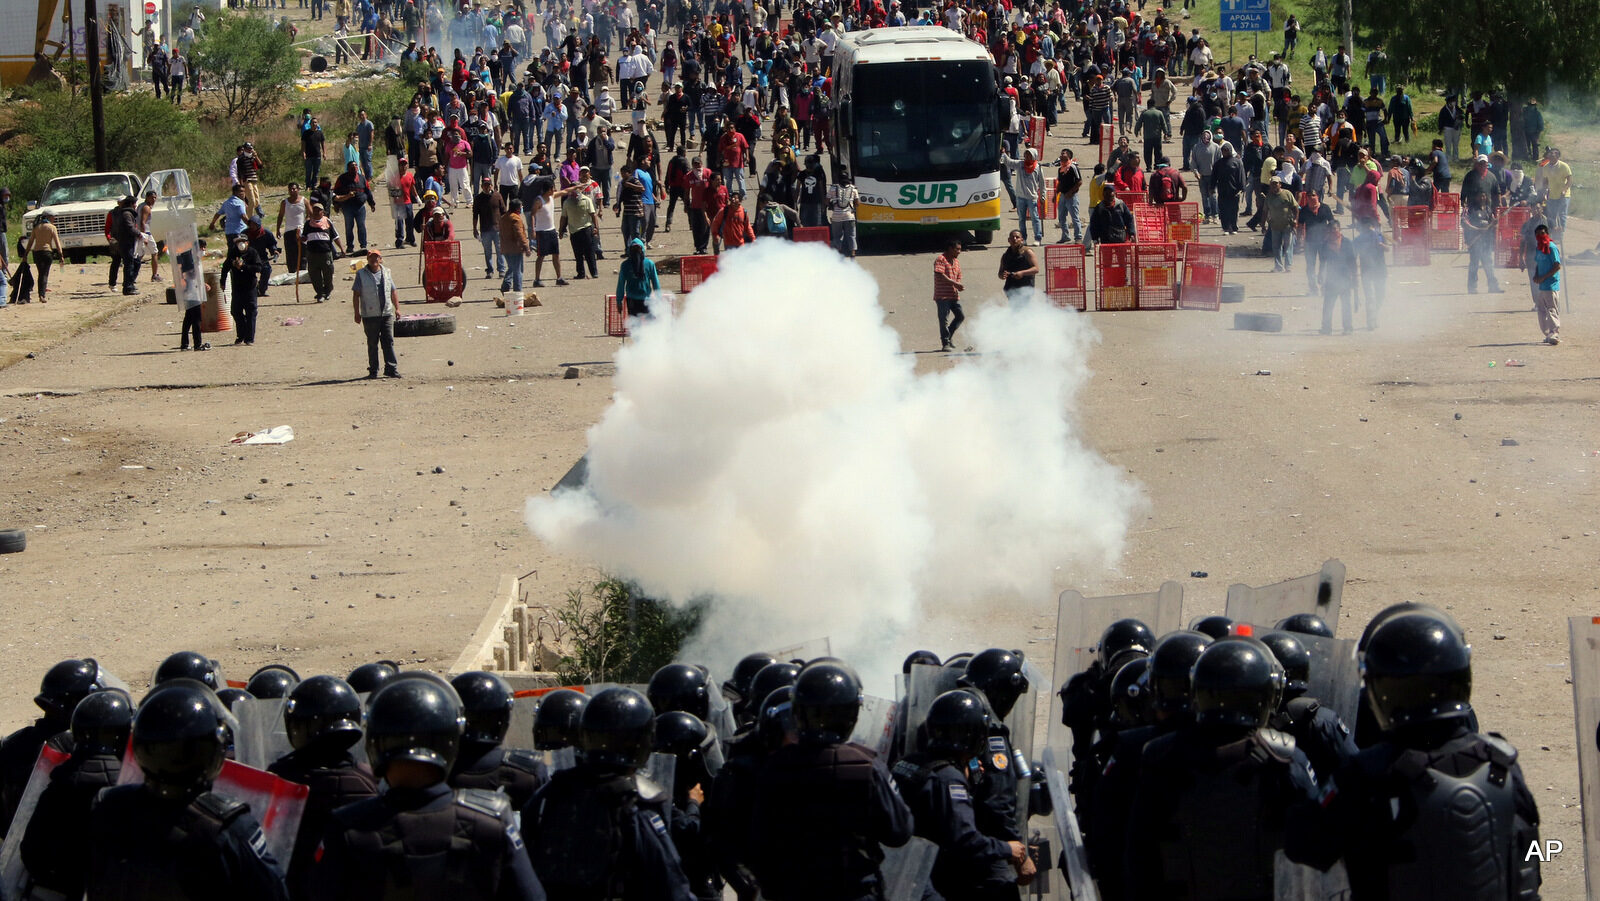 Riot police battle with protesting teachers who were blocking a federal highway in the state of Oaxaca, near the town of Nochixtlan, Mexico, Sunday, June 19, 2016. The teachers are protesting against plans to overhaul the country's education system which include federally mandated teacher evaluations.